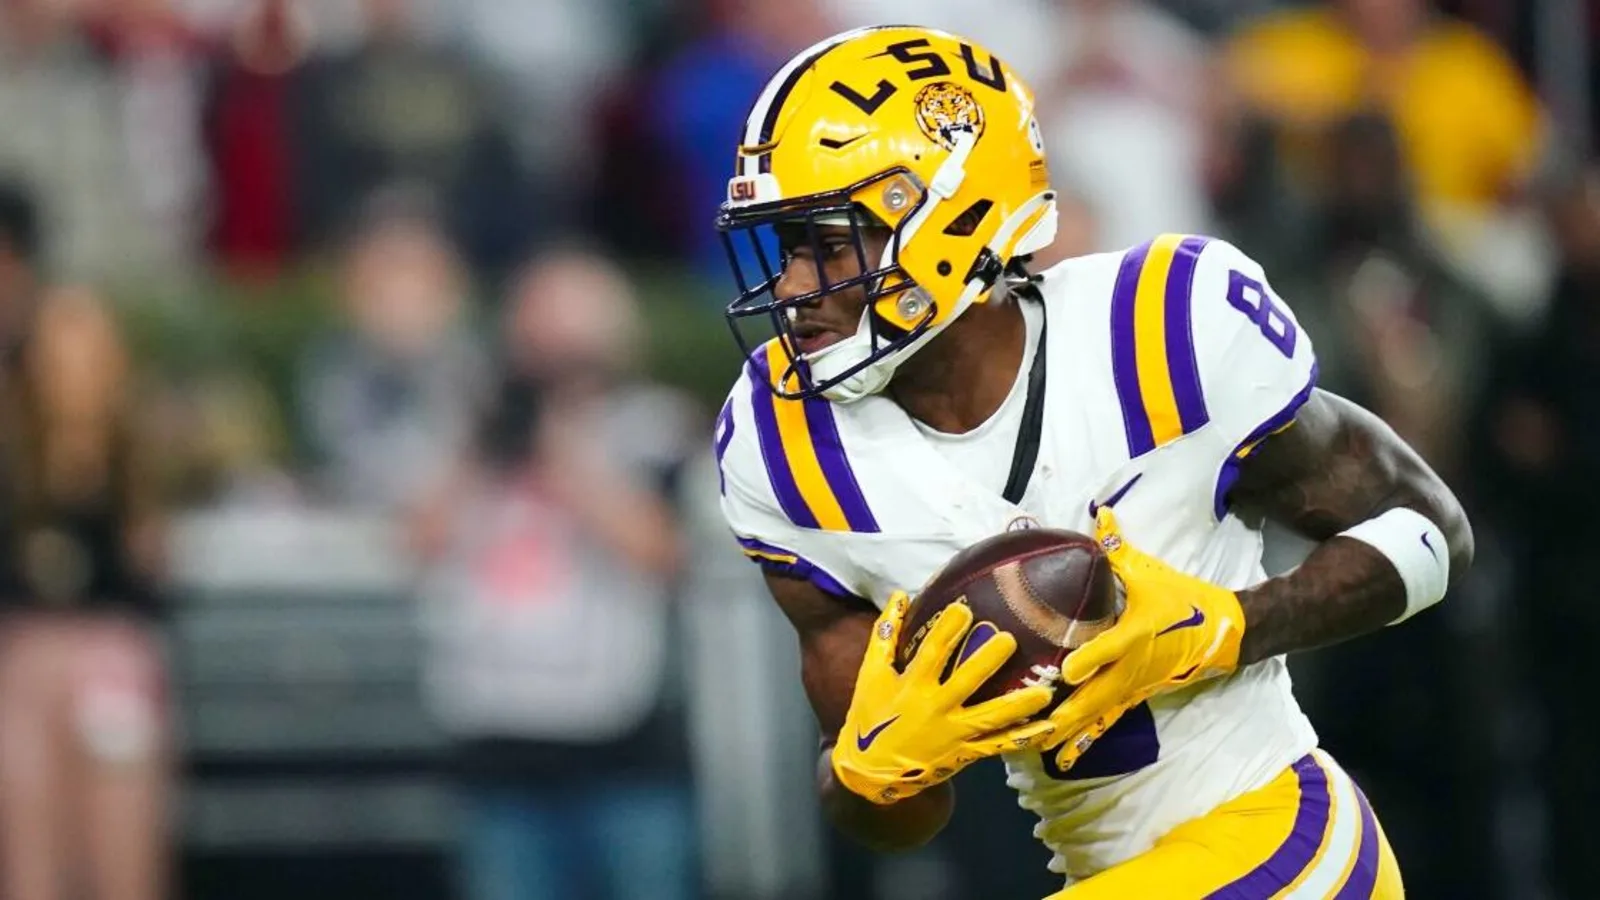 Rising Star or Red Flag? Inside Look at LSU's Malik Nabers and His NFL Draft Buzz